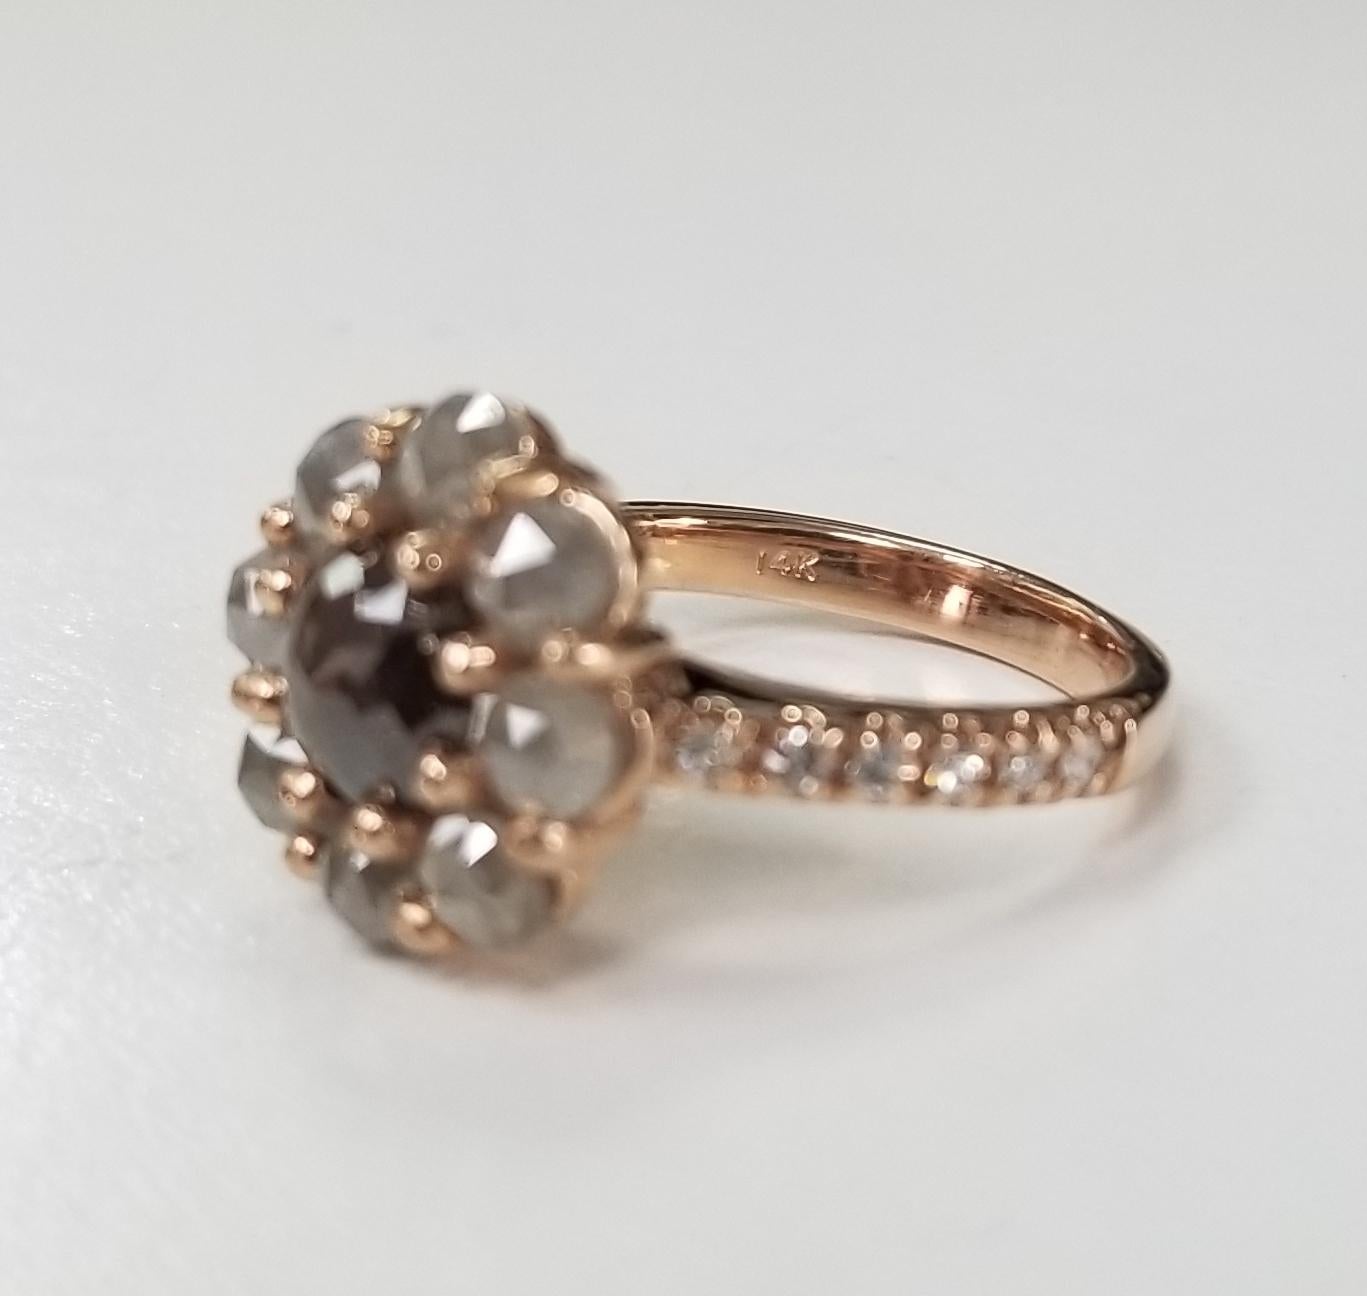 14k rose gold diamond ring containing 1 round brown rose cut diamond weighing .87pts. and 8 round grey rose cut diamonds weighing 1.75cts. with 12 round single cut diamonds on the shank weighing .17pts.  This ring is a size 6 but we will size to fit